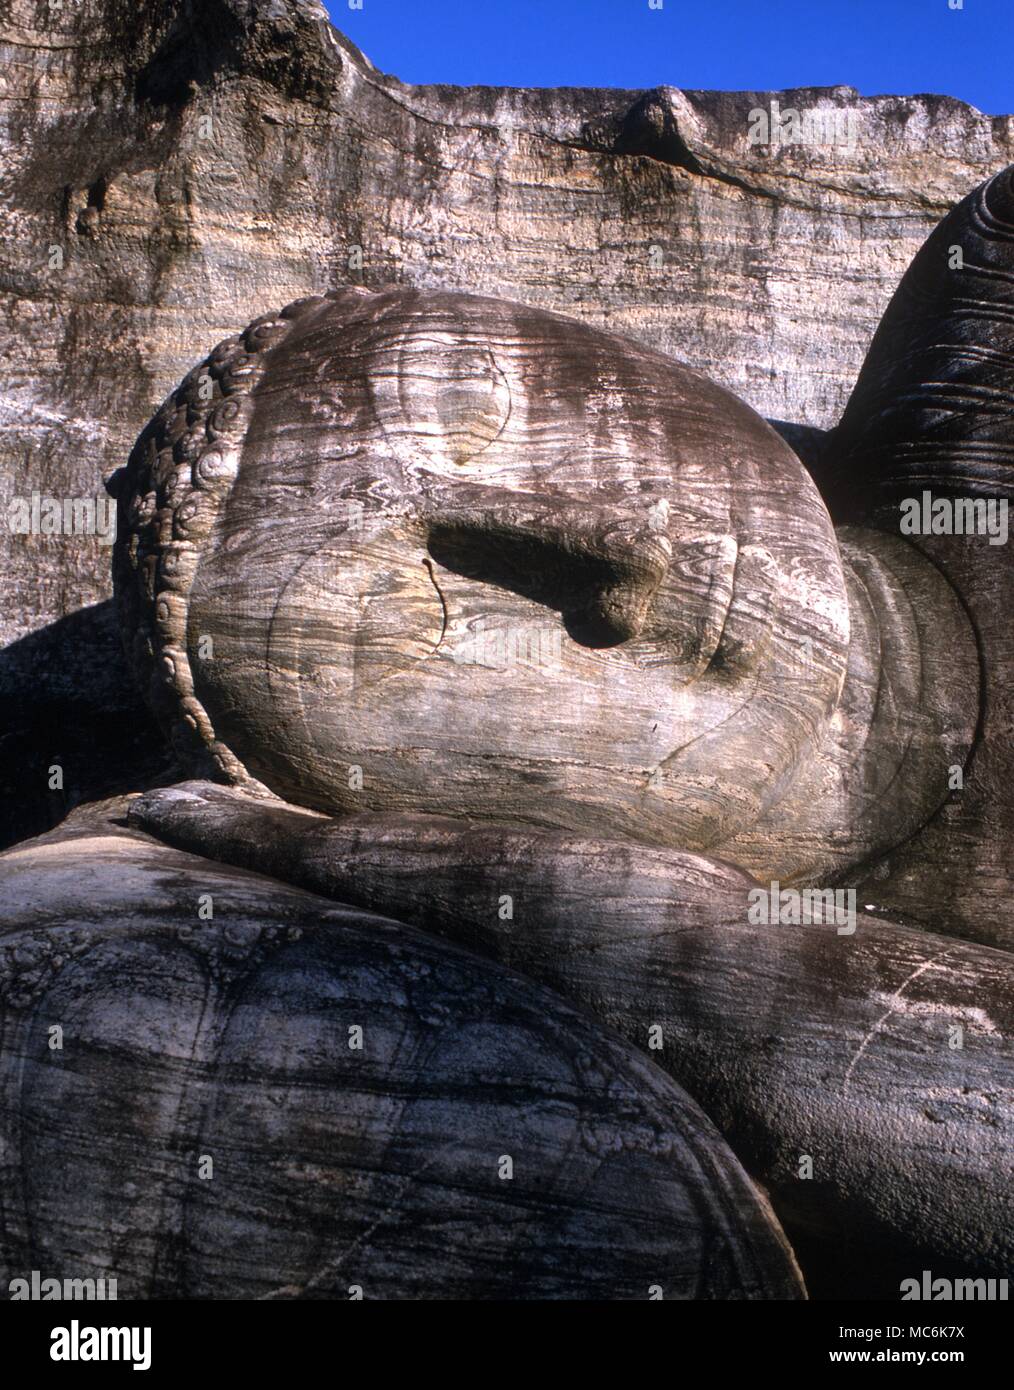 Sri Lanka Polonnaruwa Ancient City Gal Vihara colossal Buddhas carving in the granit boulders recumbant image is 46 feet long standing is 23 feet high Stock Photo